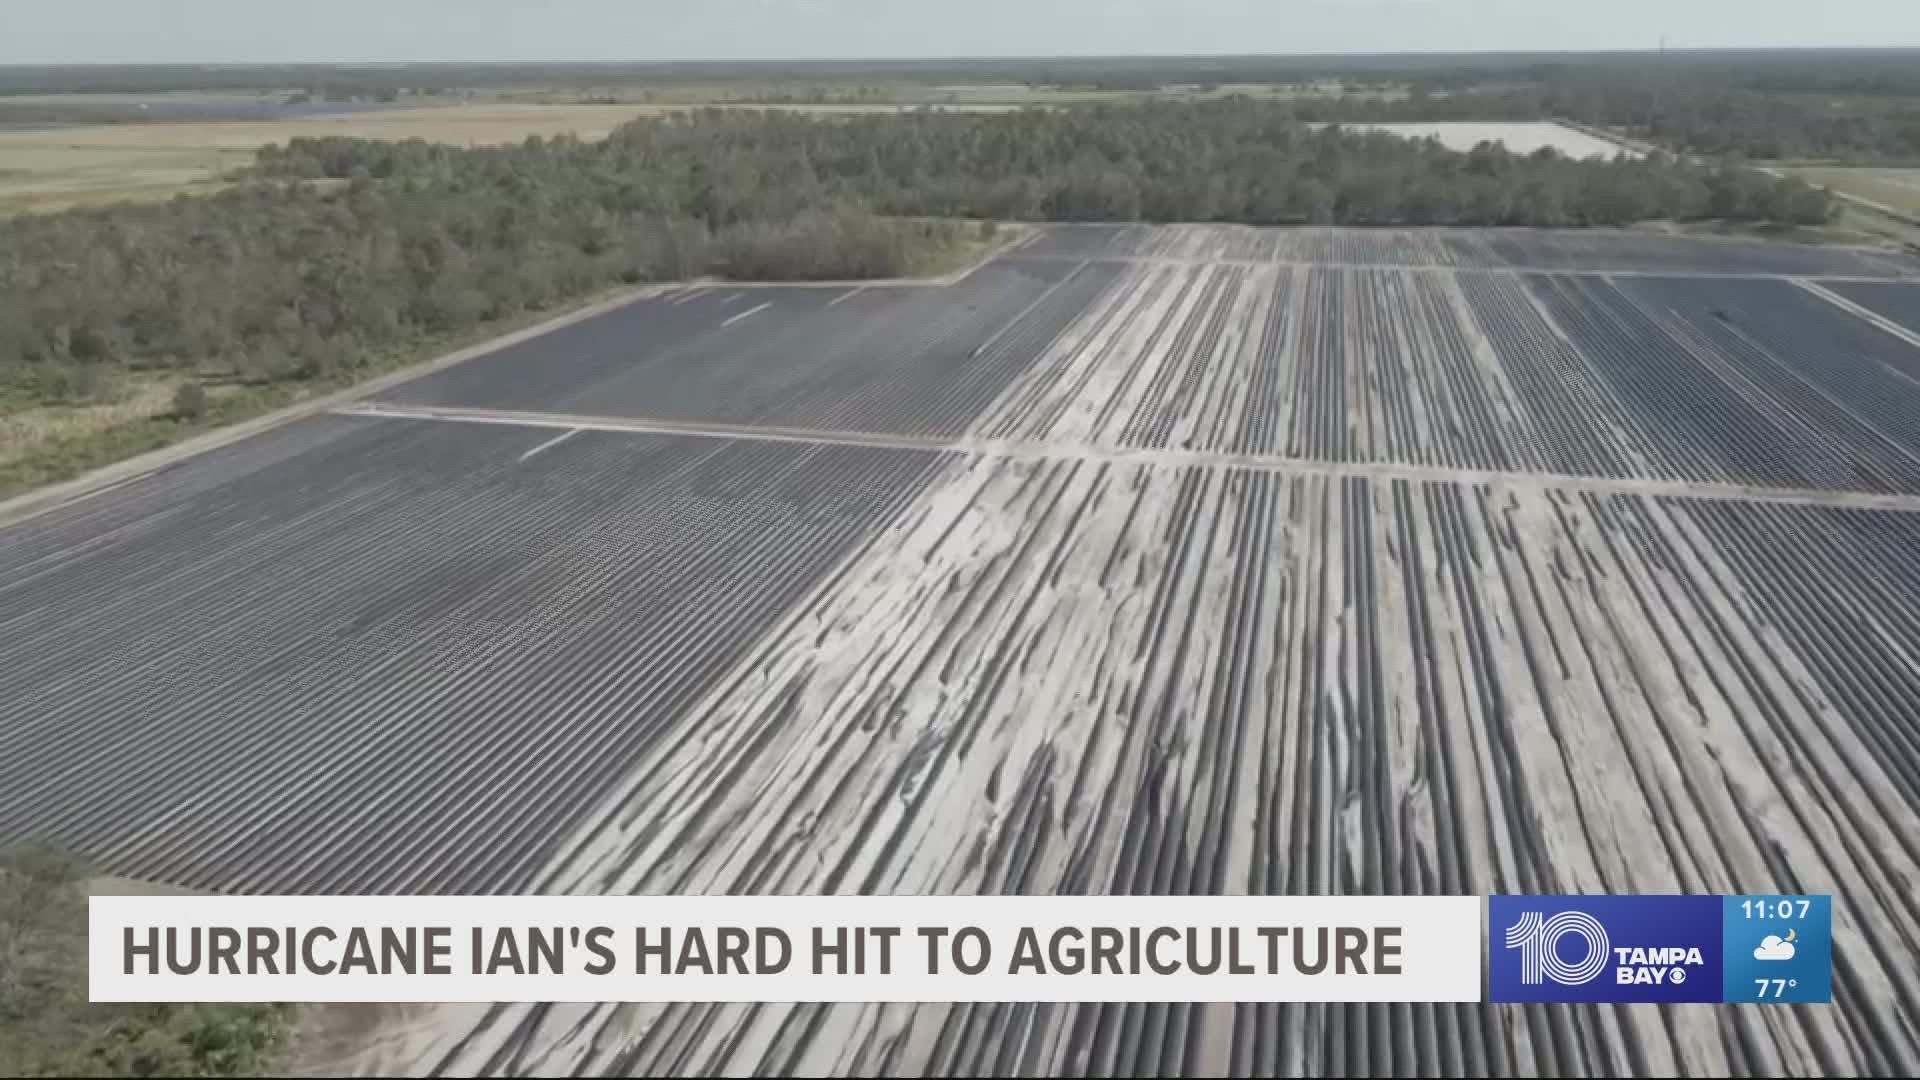 The Florida Department of Agriculture estimates Hurricane Ian damages to the state's agriculture is as high as $1.8 billion.